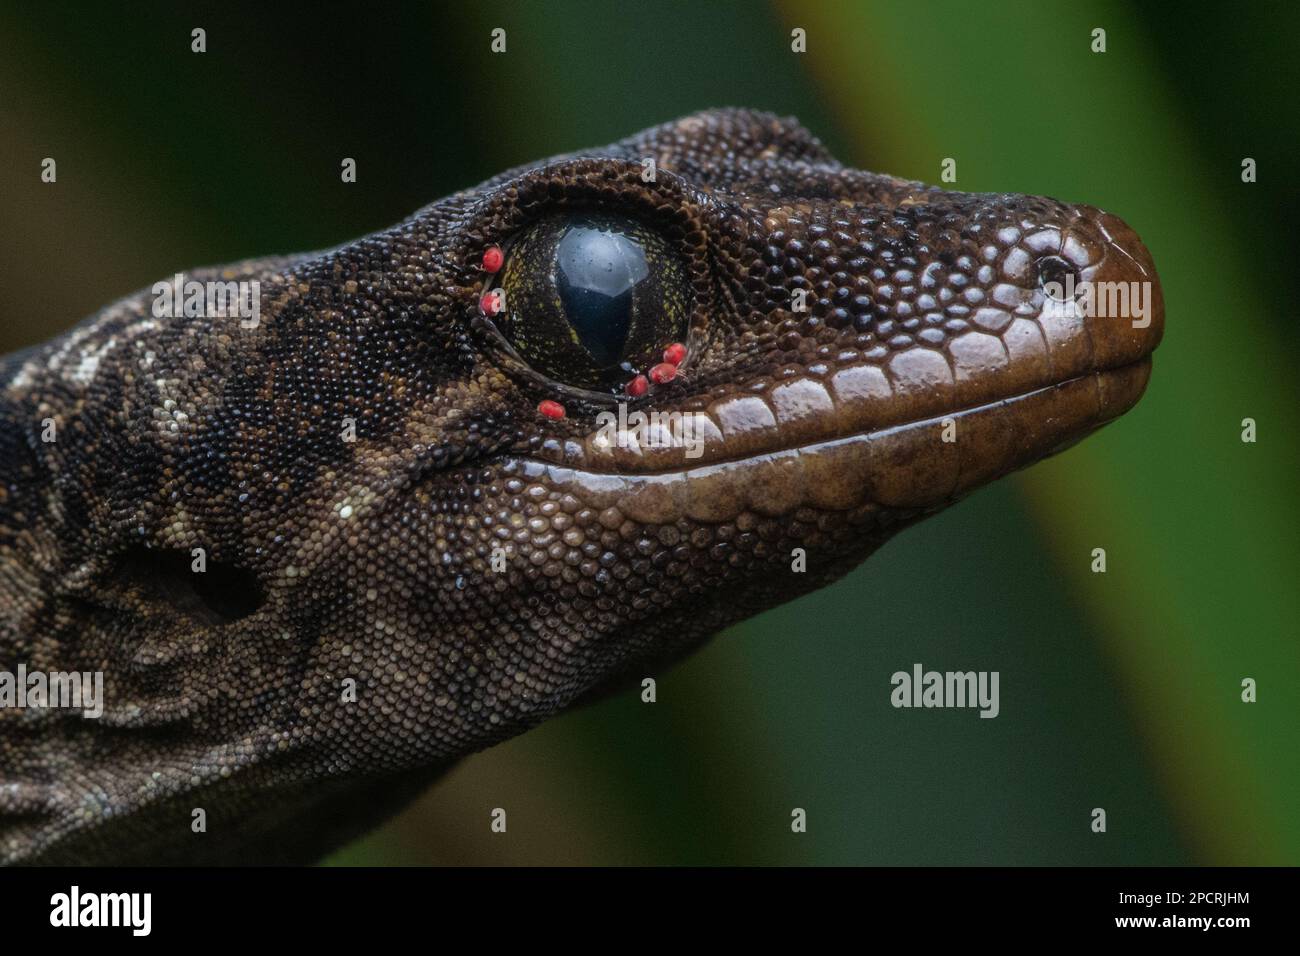 A macro portrait of a wild Duvaucel's gecko, Hoplodactylus duvaucelii, and the parasitic reptile specialist mites, Geckobia naultina, around its eye. Stock Photo